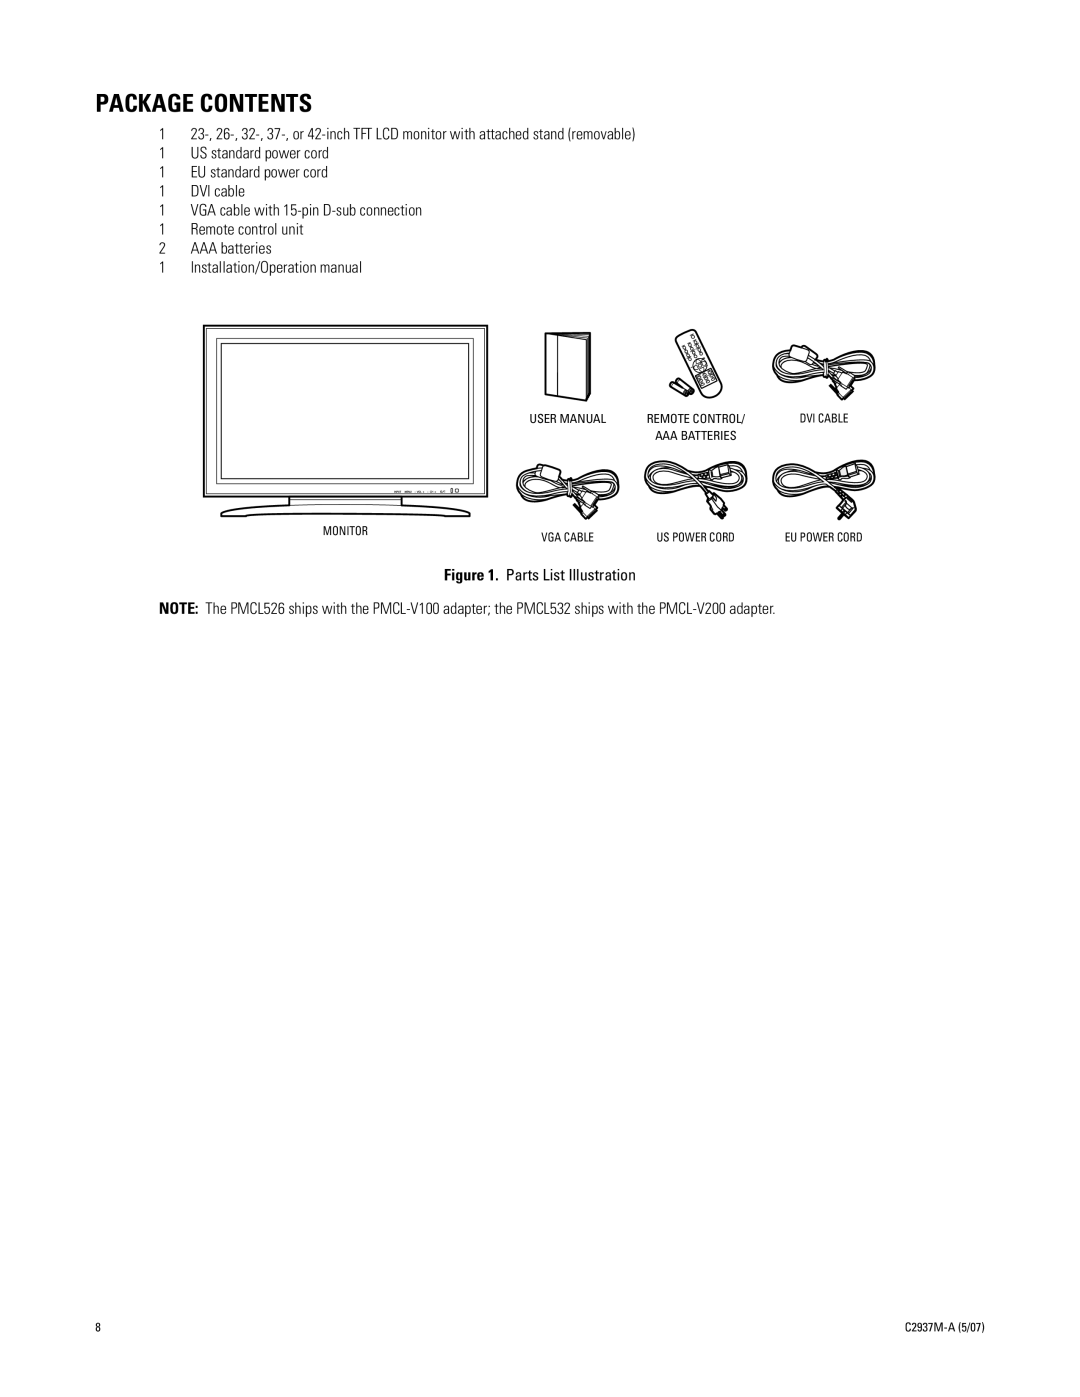 Pelco 500 Series manual Package Contents 